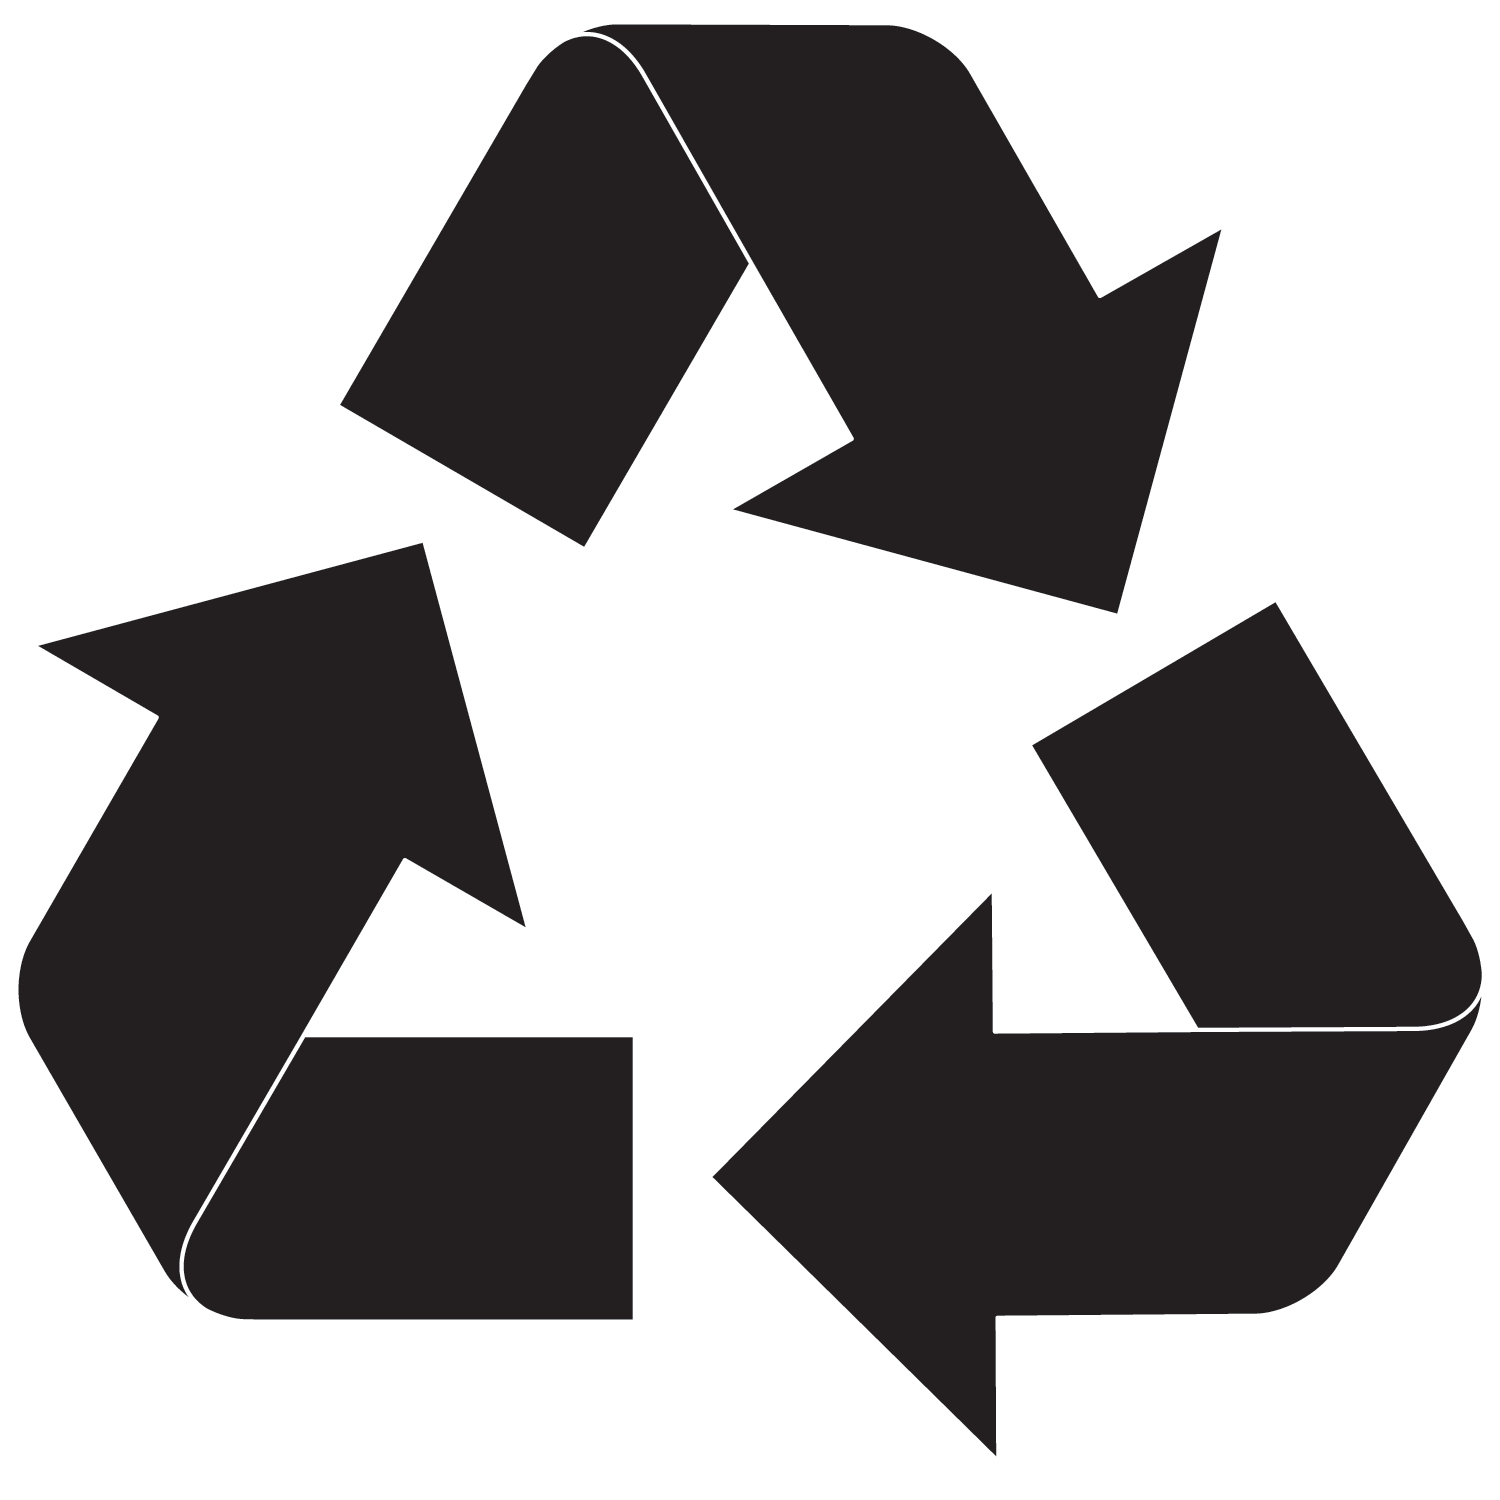 Printable Recycling Symbol Arrows Jcr Home Page - ClipArt Best ...